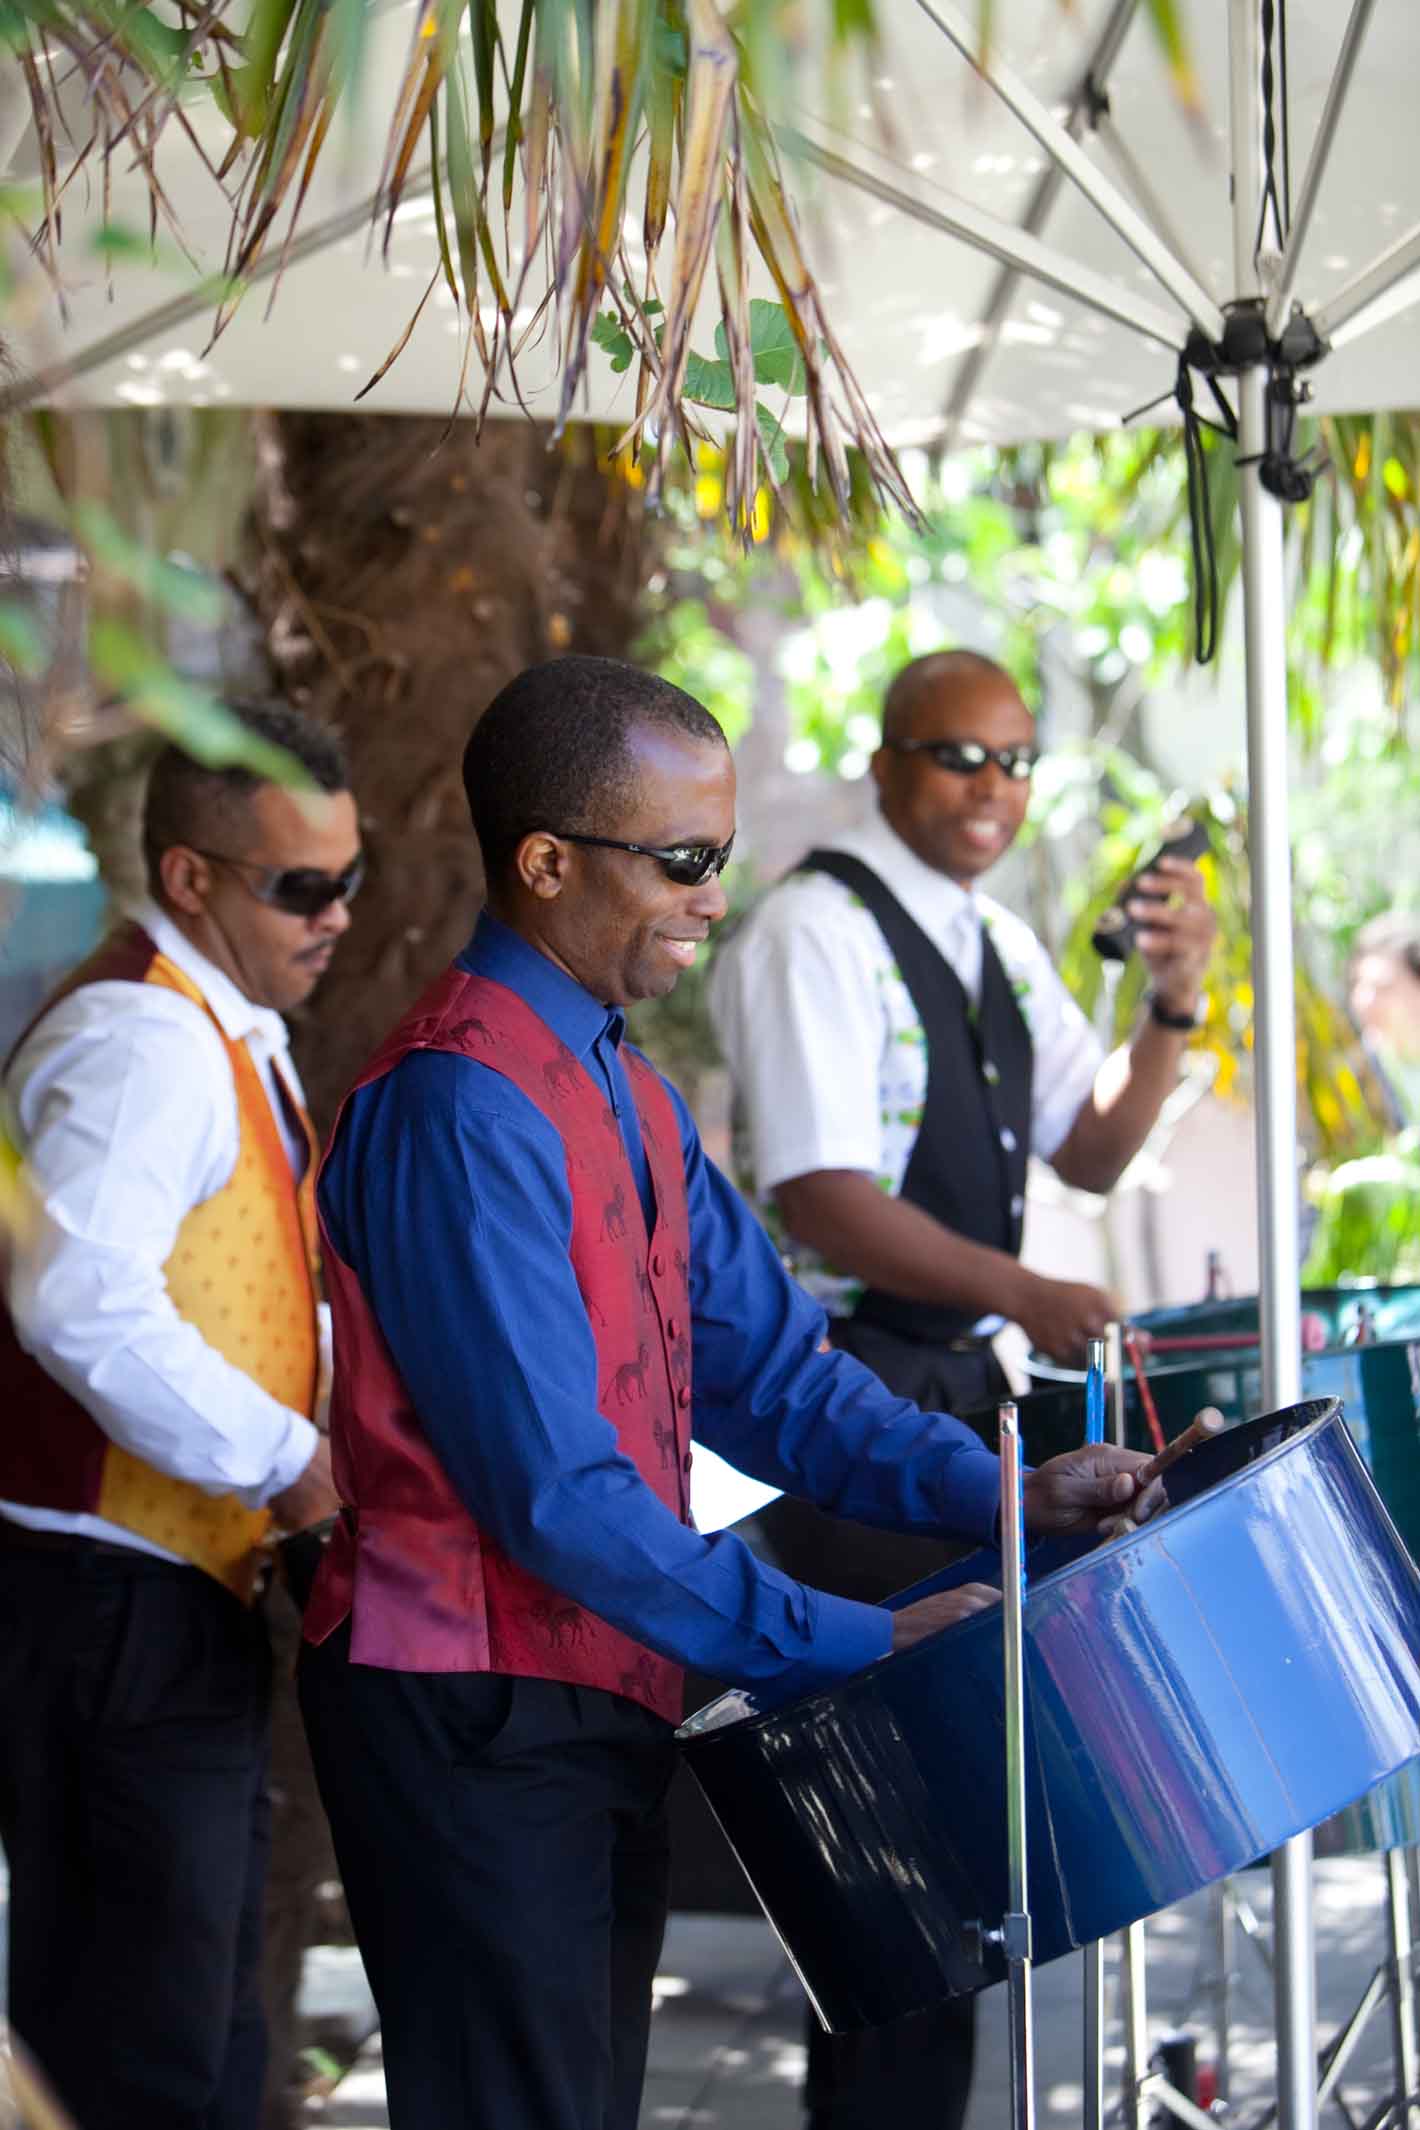 Caribbean steel drum band performing at a wedding reception in London, ideal music entertainment for weddings and creative venue ideas.